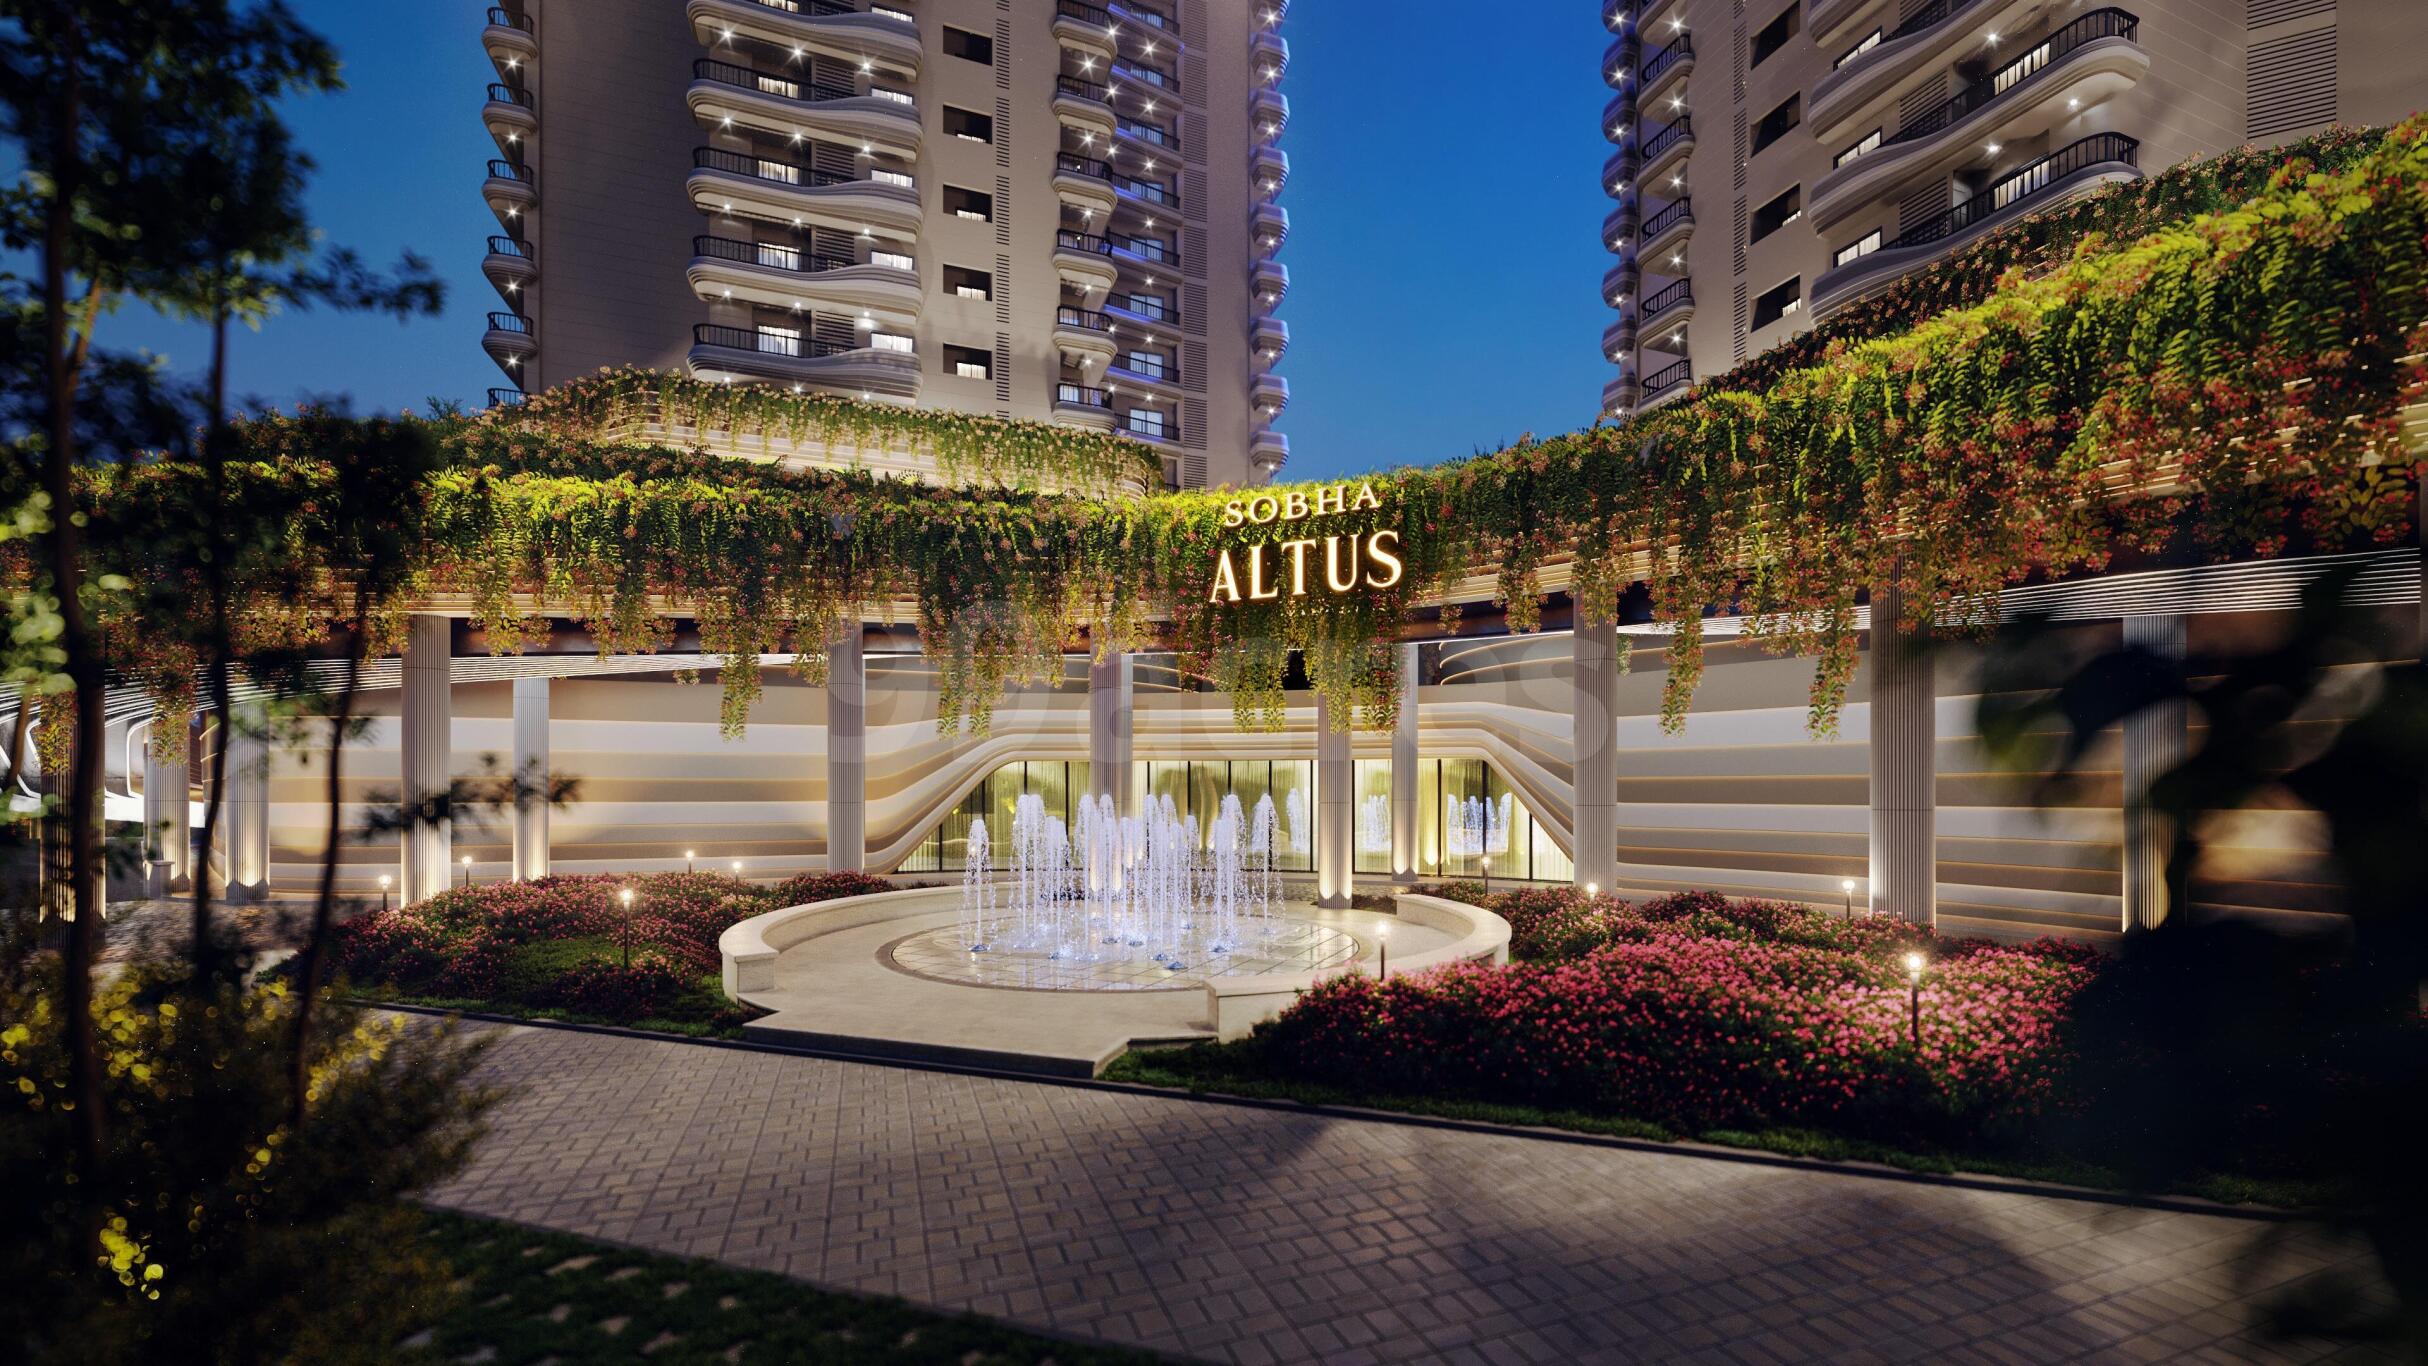 Why Sobha Altus Sector 106 Gurgaon Apartments are a Great Buy